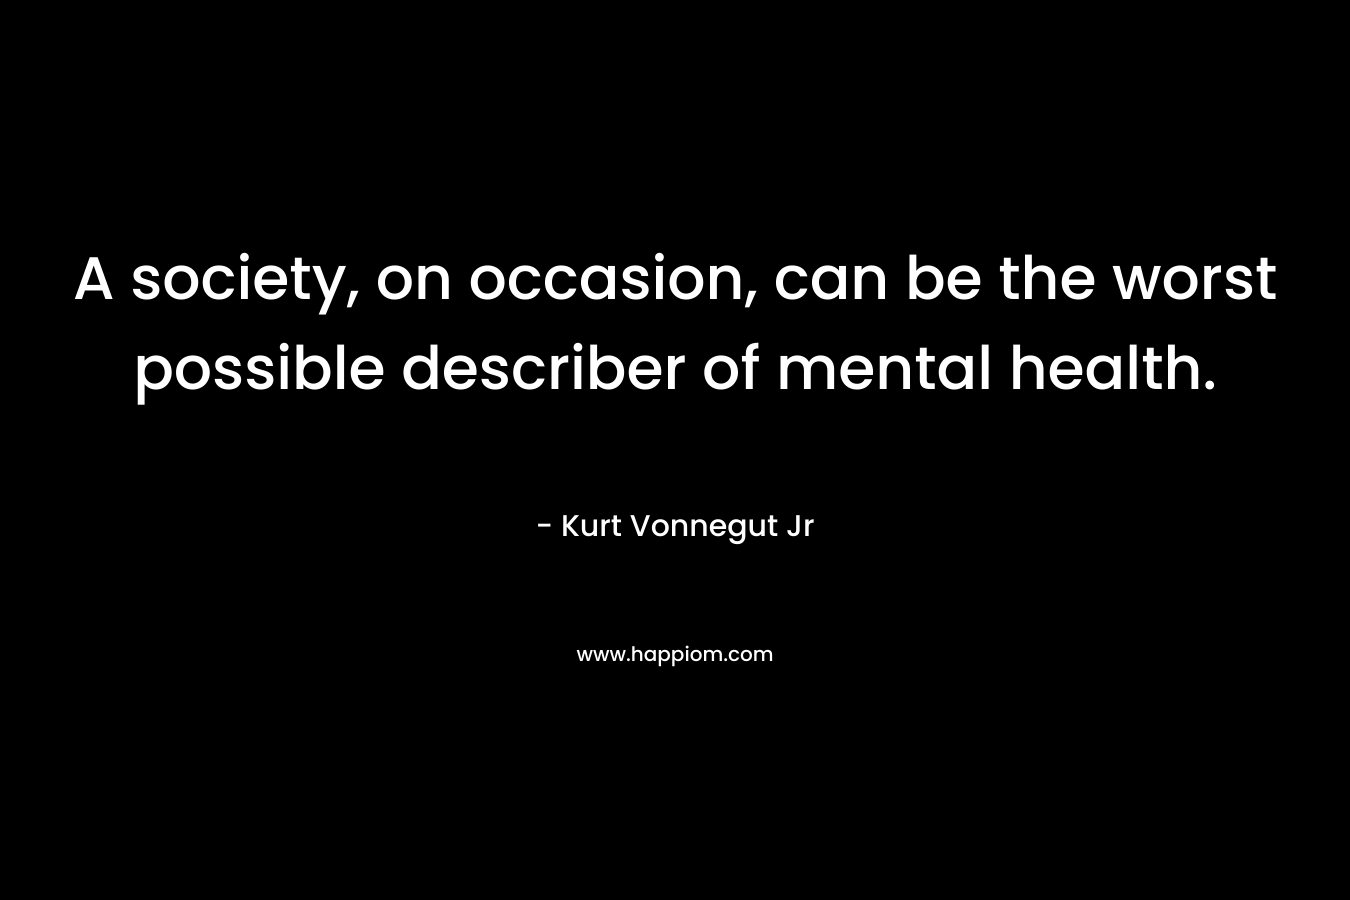 A society, on occasion, can be the worst possible describer of mental health.